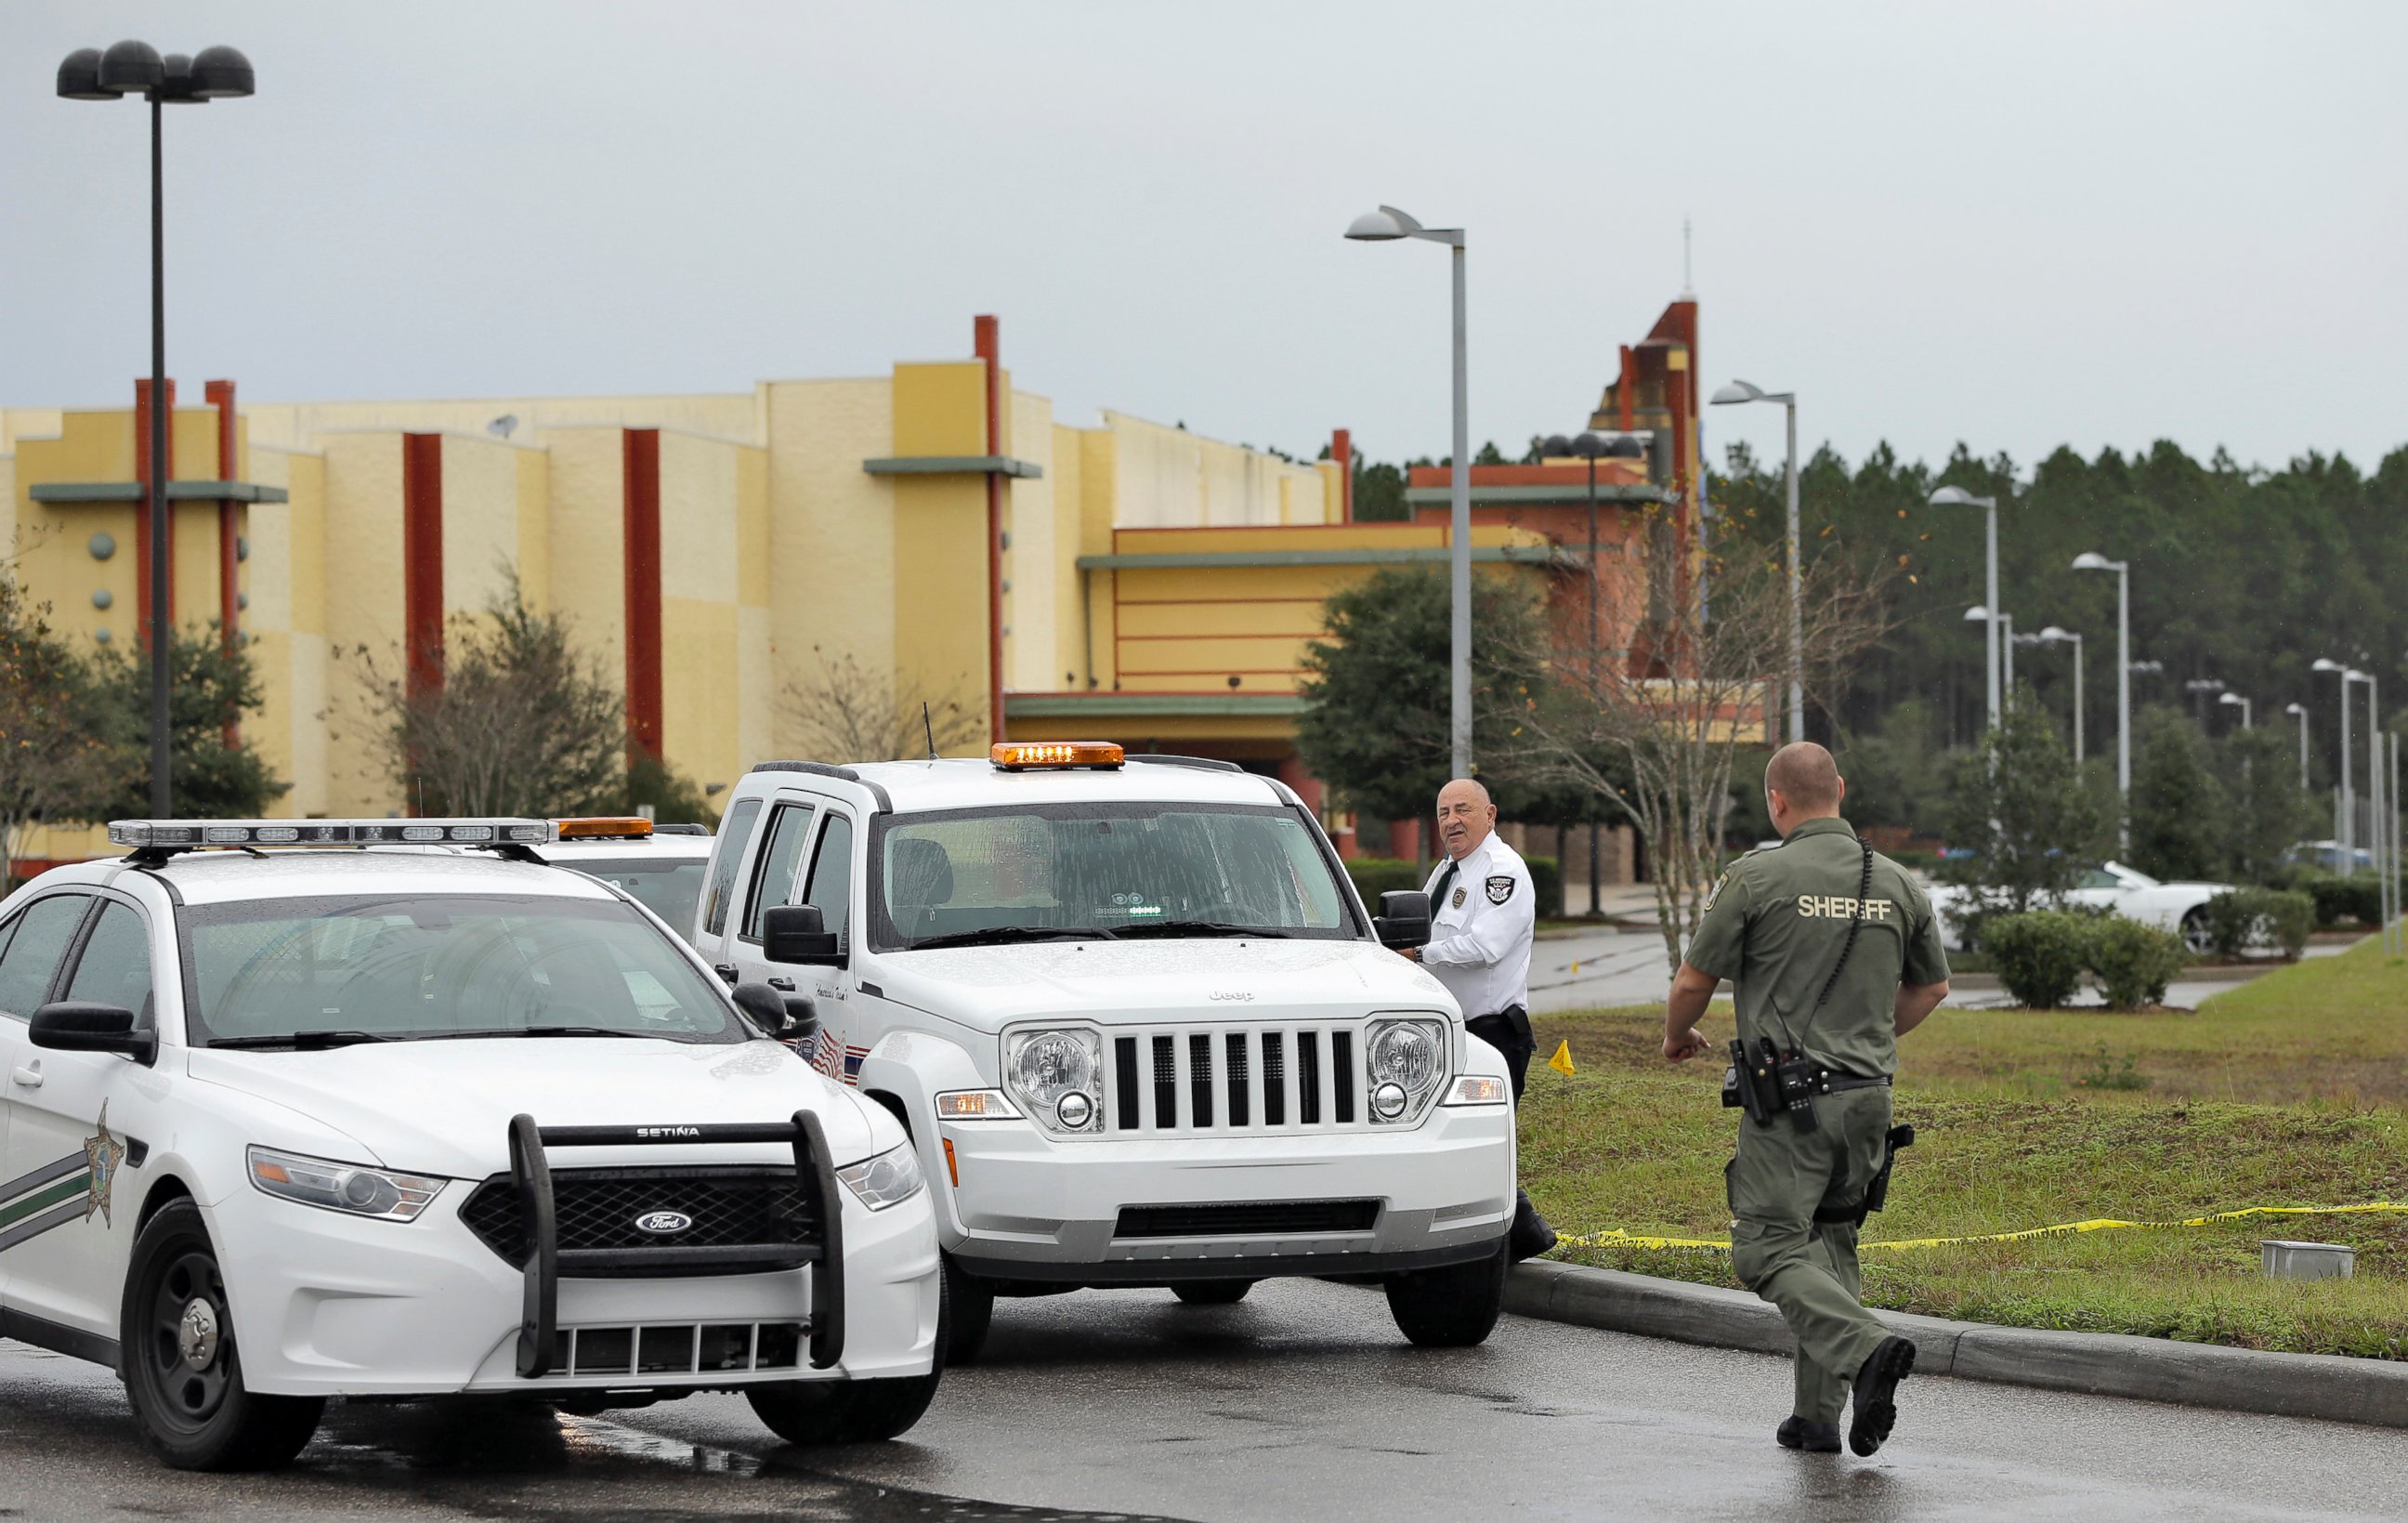 PHOTO: A Pasco County sheriff's deputy and a security guard block the driveway to the Cobb theater, Jan. 14, 2014 in Wesley Chapel, Fla.